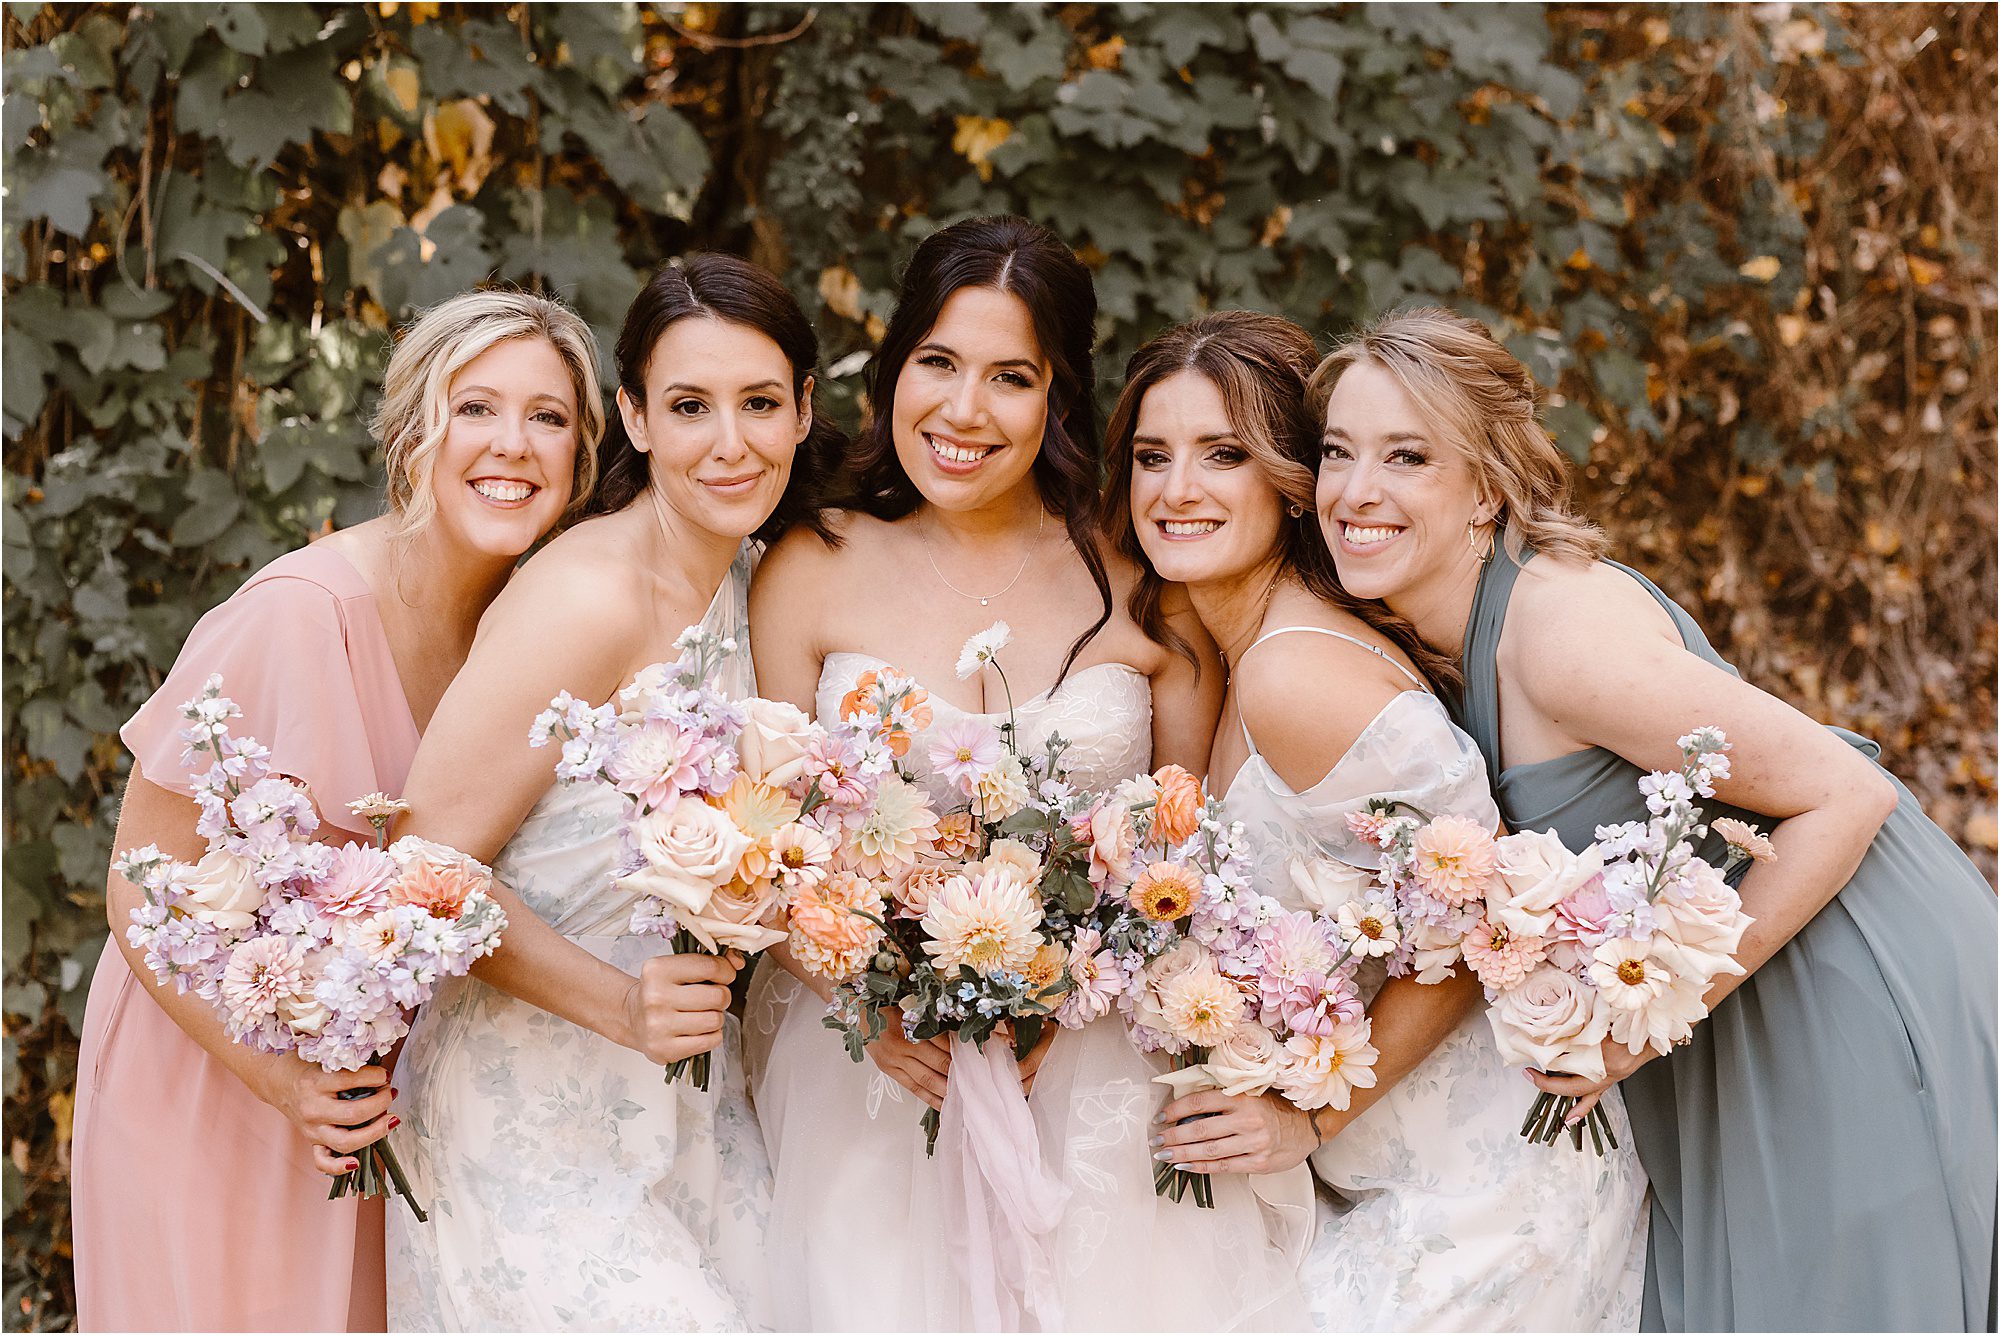 bride smiles with bridesmaids in floral bridesmaid dresses holding large fall wedding bouquets